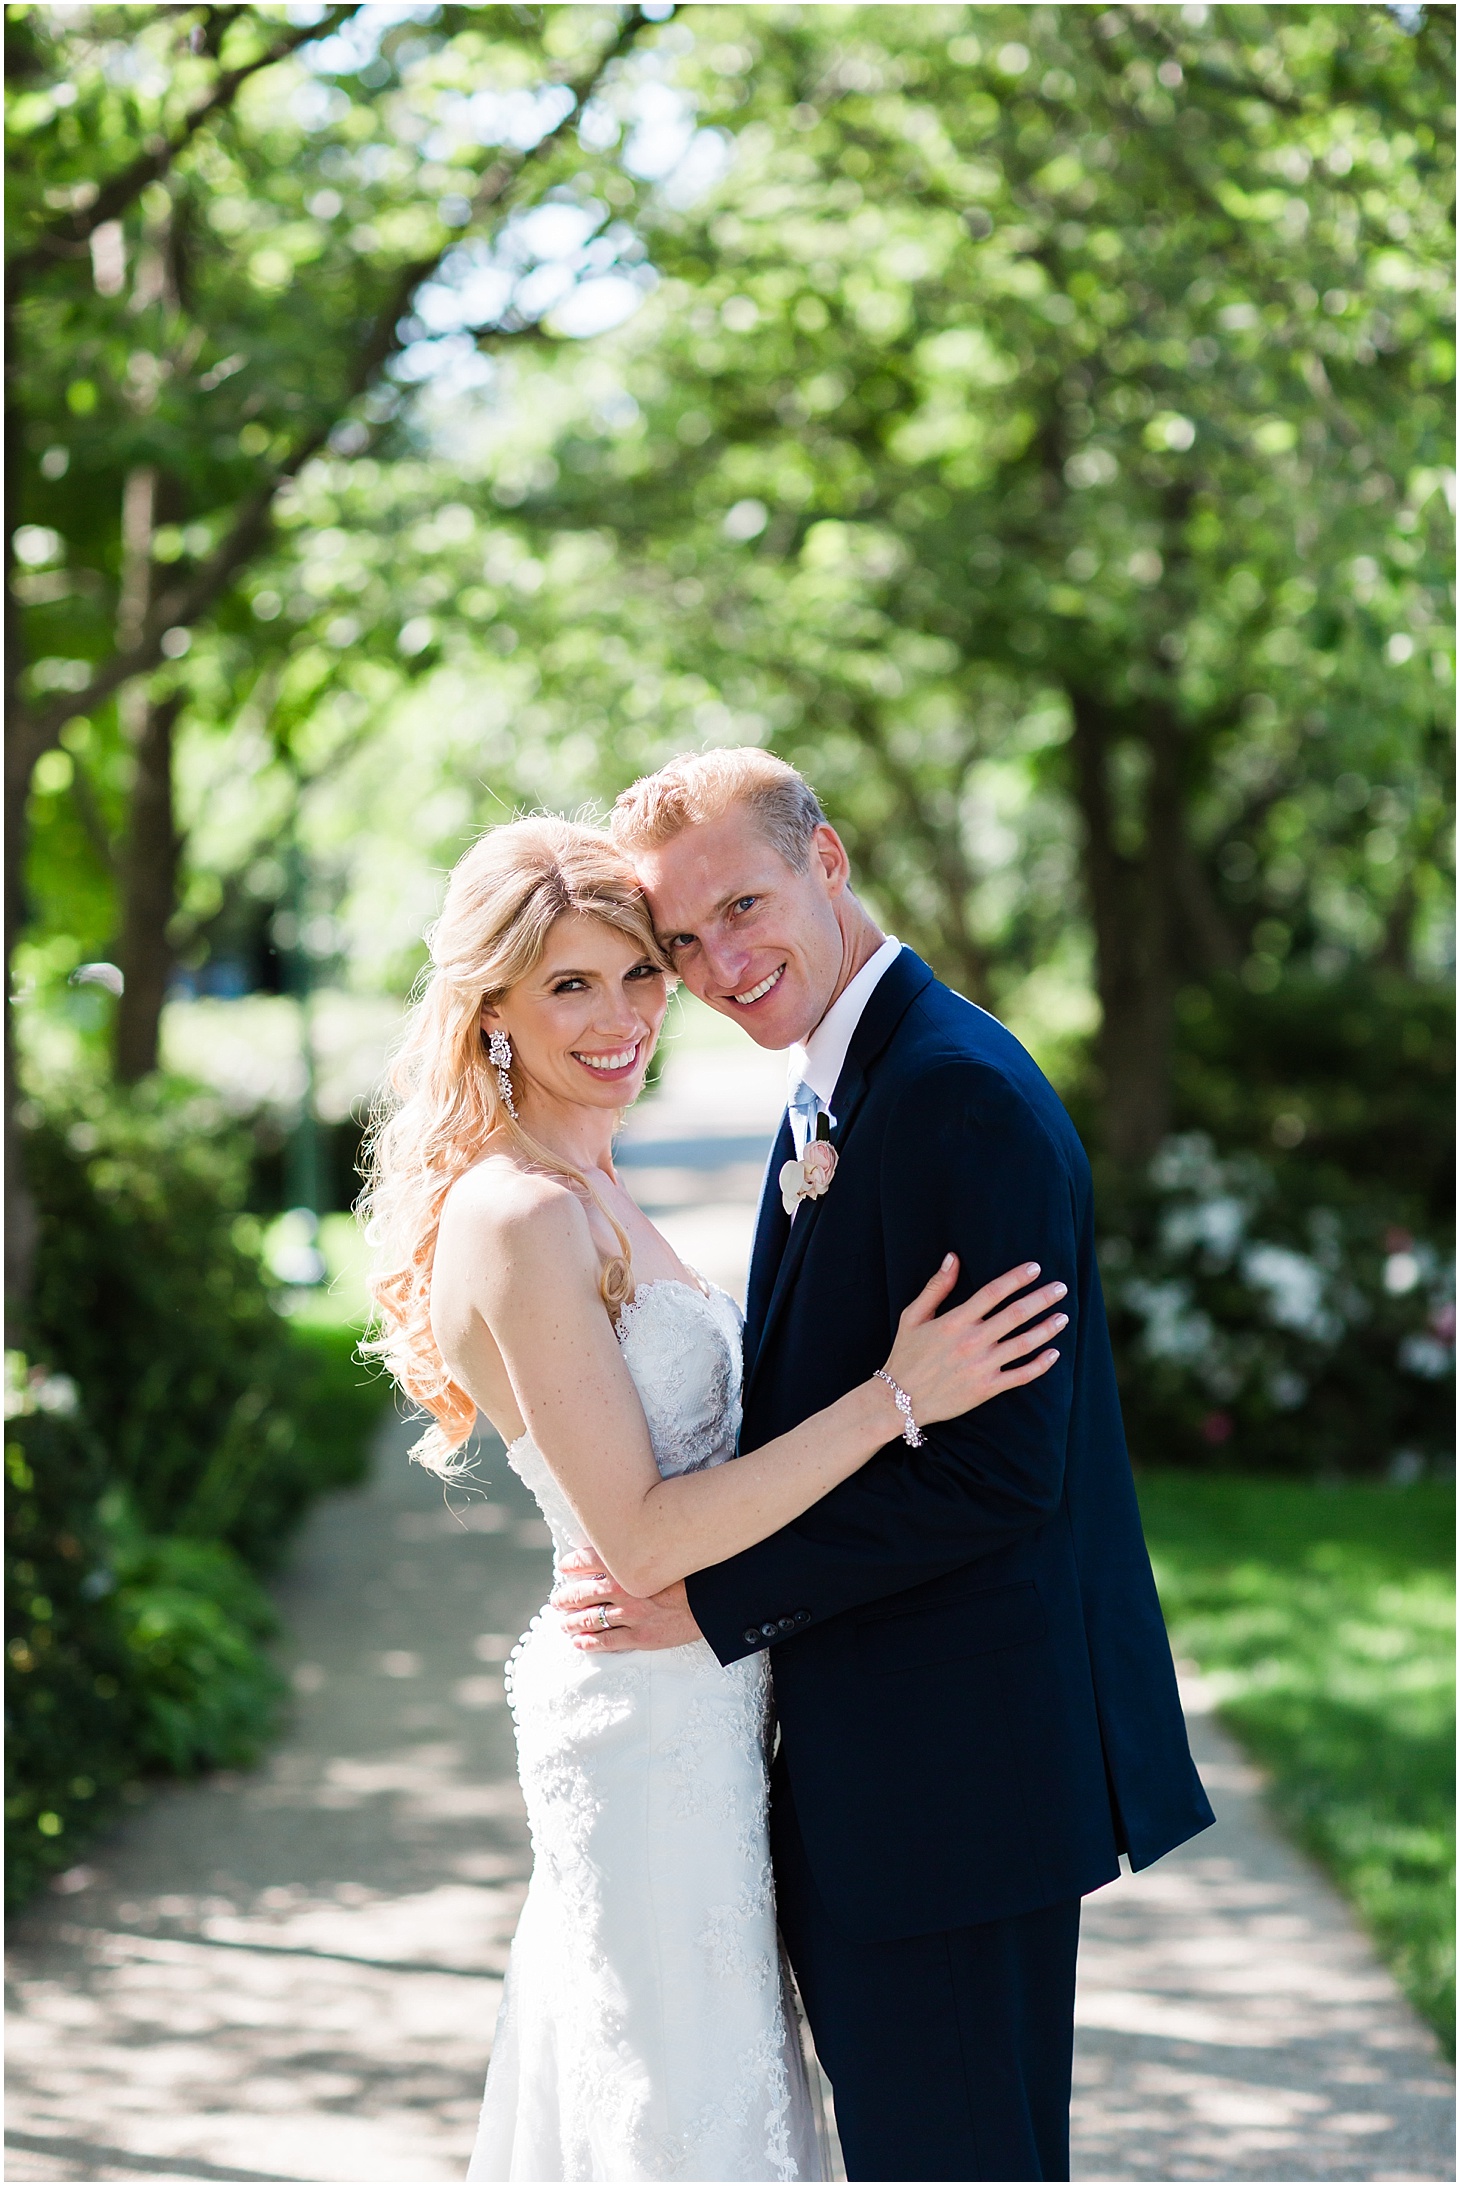 Navy and Blush Summer Wedding at the Army and Navy Club, Ceremony at Capitol Hill Baptist Church, Sarah Bradshaw Photography, DC Wedding Photographer